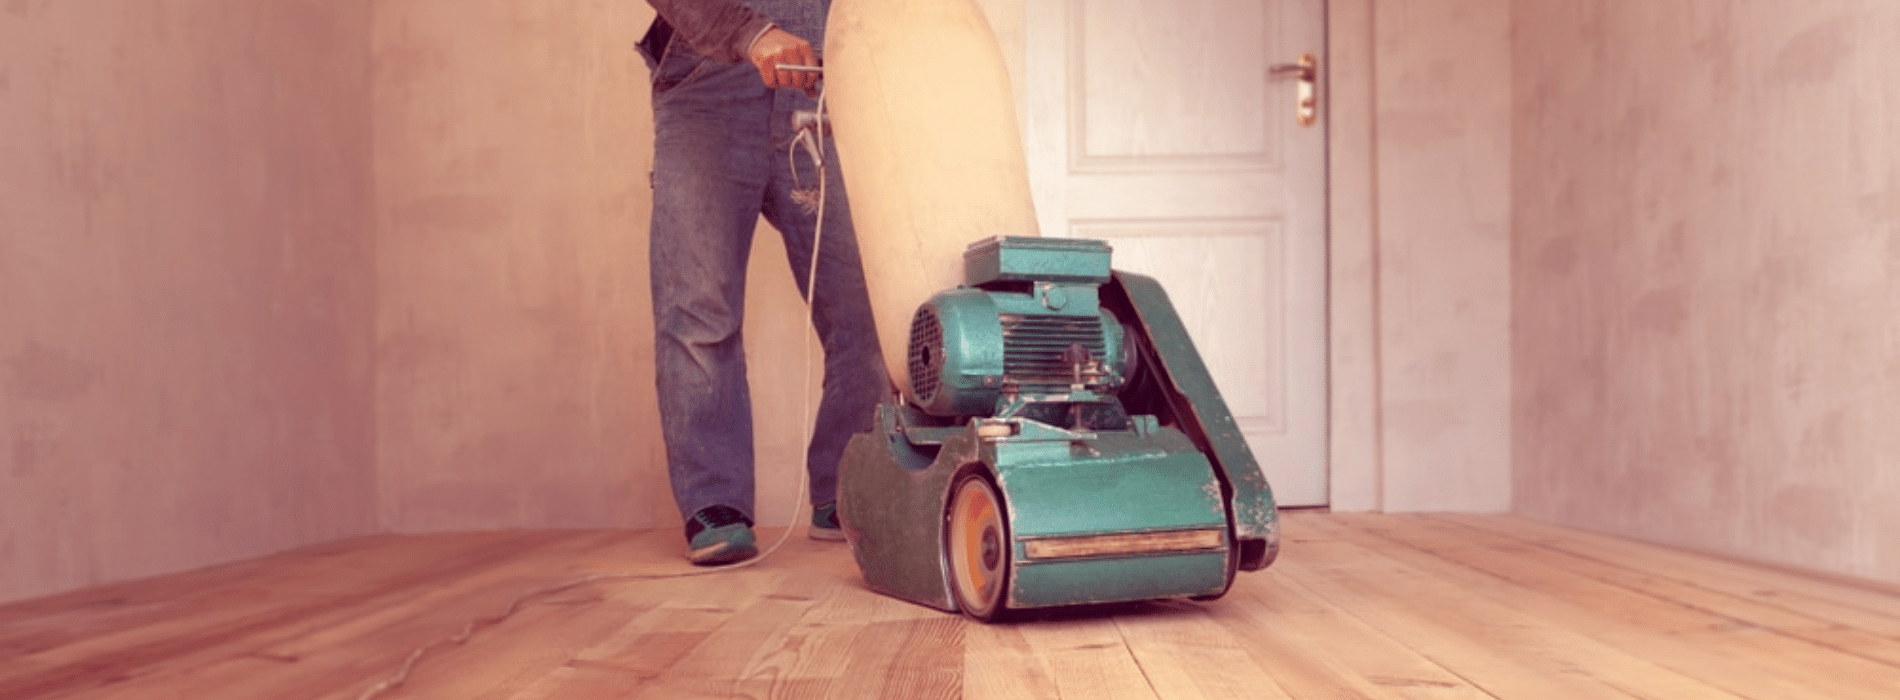 Mr Sander® in Dalston, E8 offer meticulous herringbone floor restoration using a 2200 effect, 230V, 50Hz Bona belt sander (200x750 mm). Our services include a clean, dust-free experience with a HEPA filter dust extraction system.